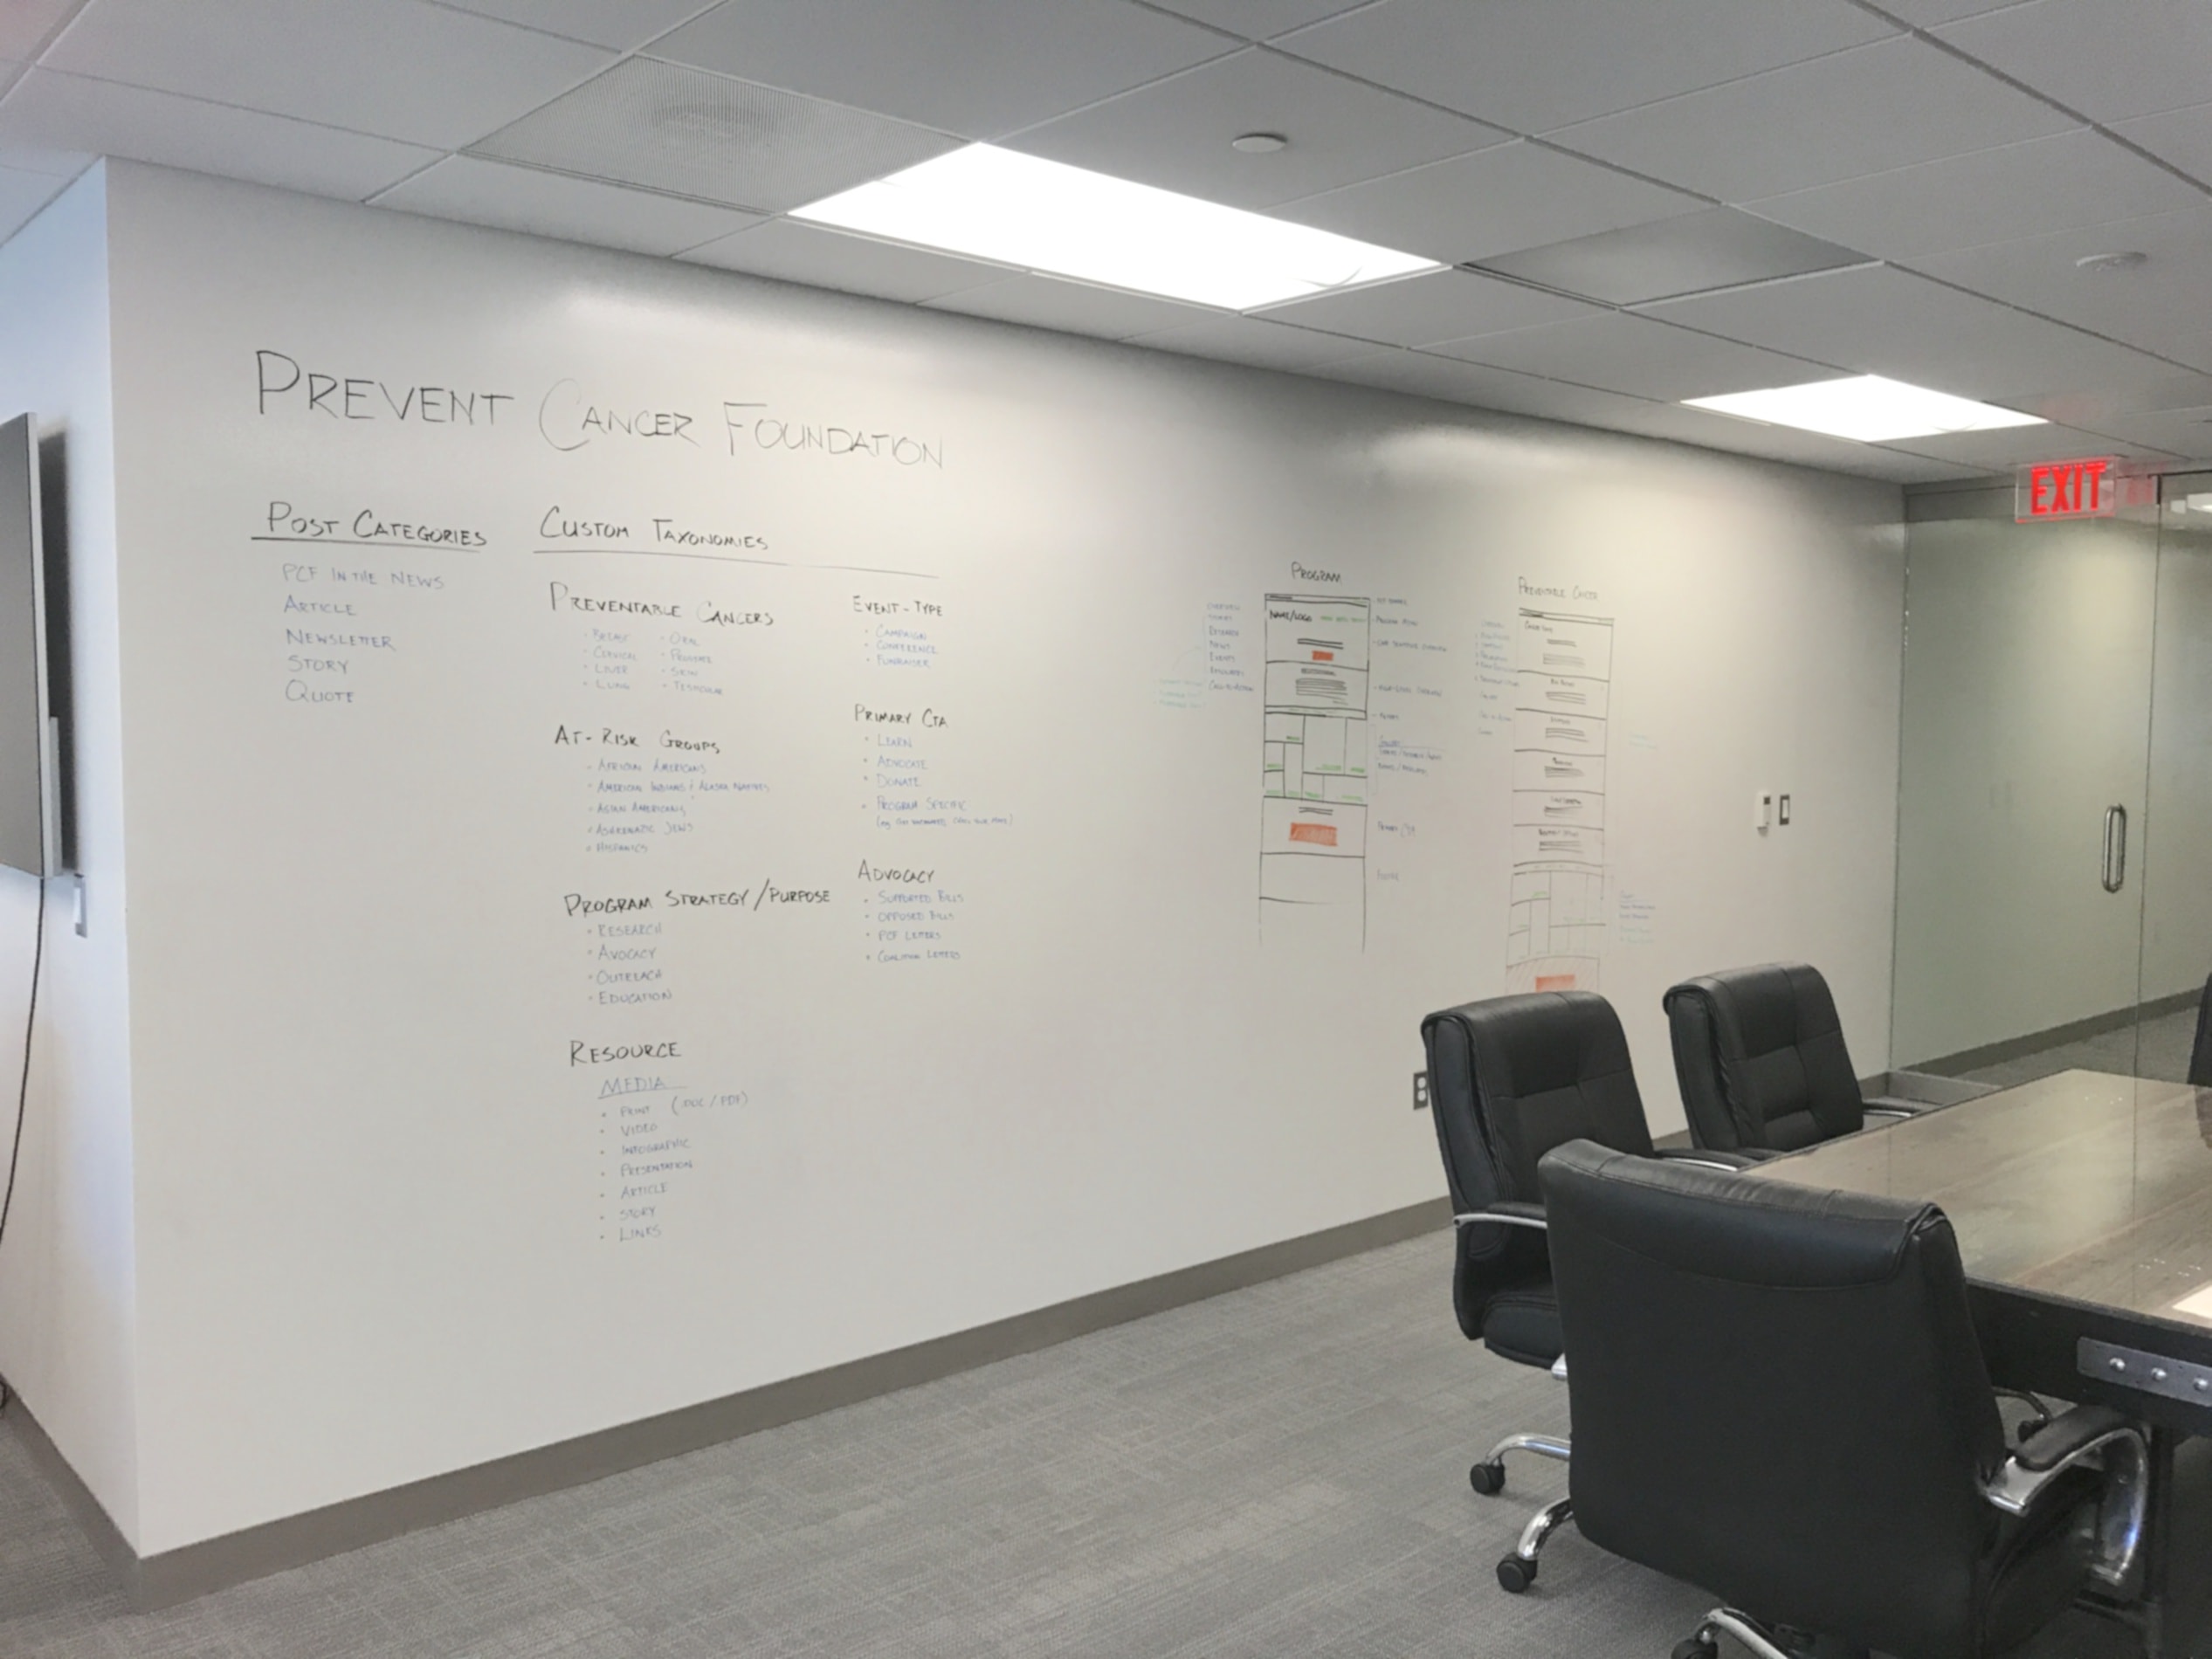 What is the best whiteboard paint? Dry erase paints guide